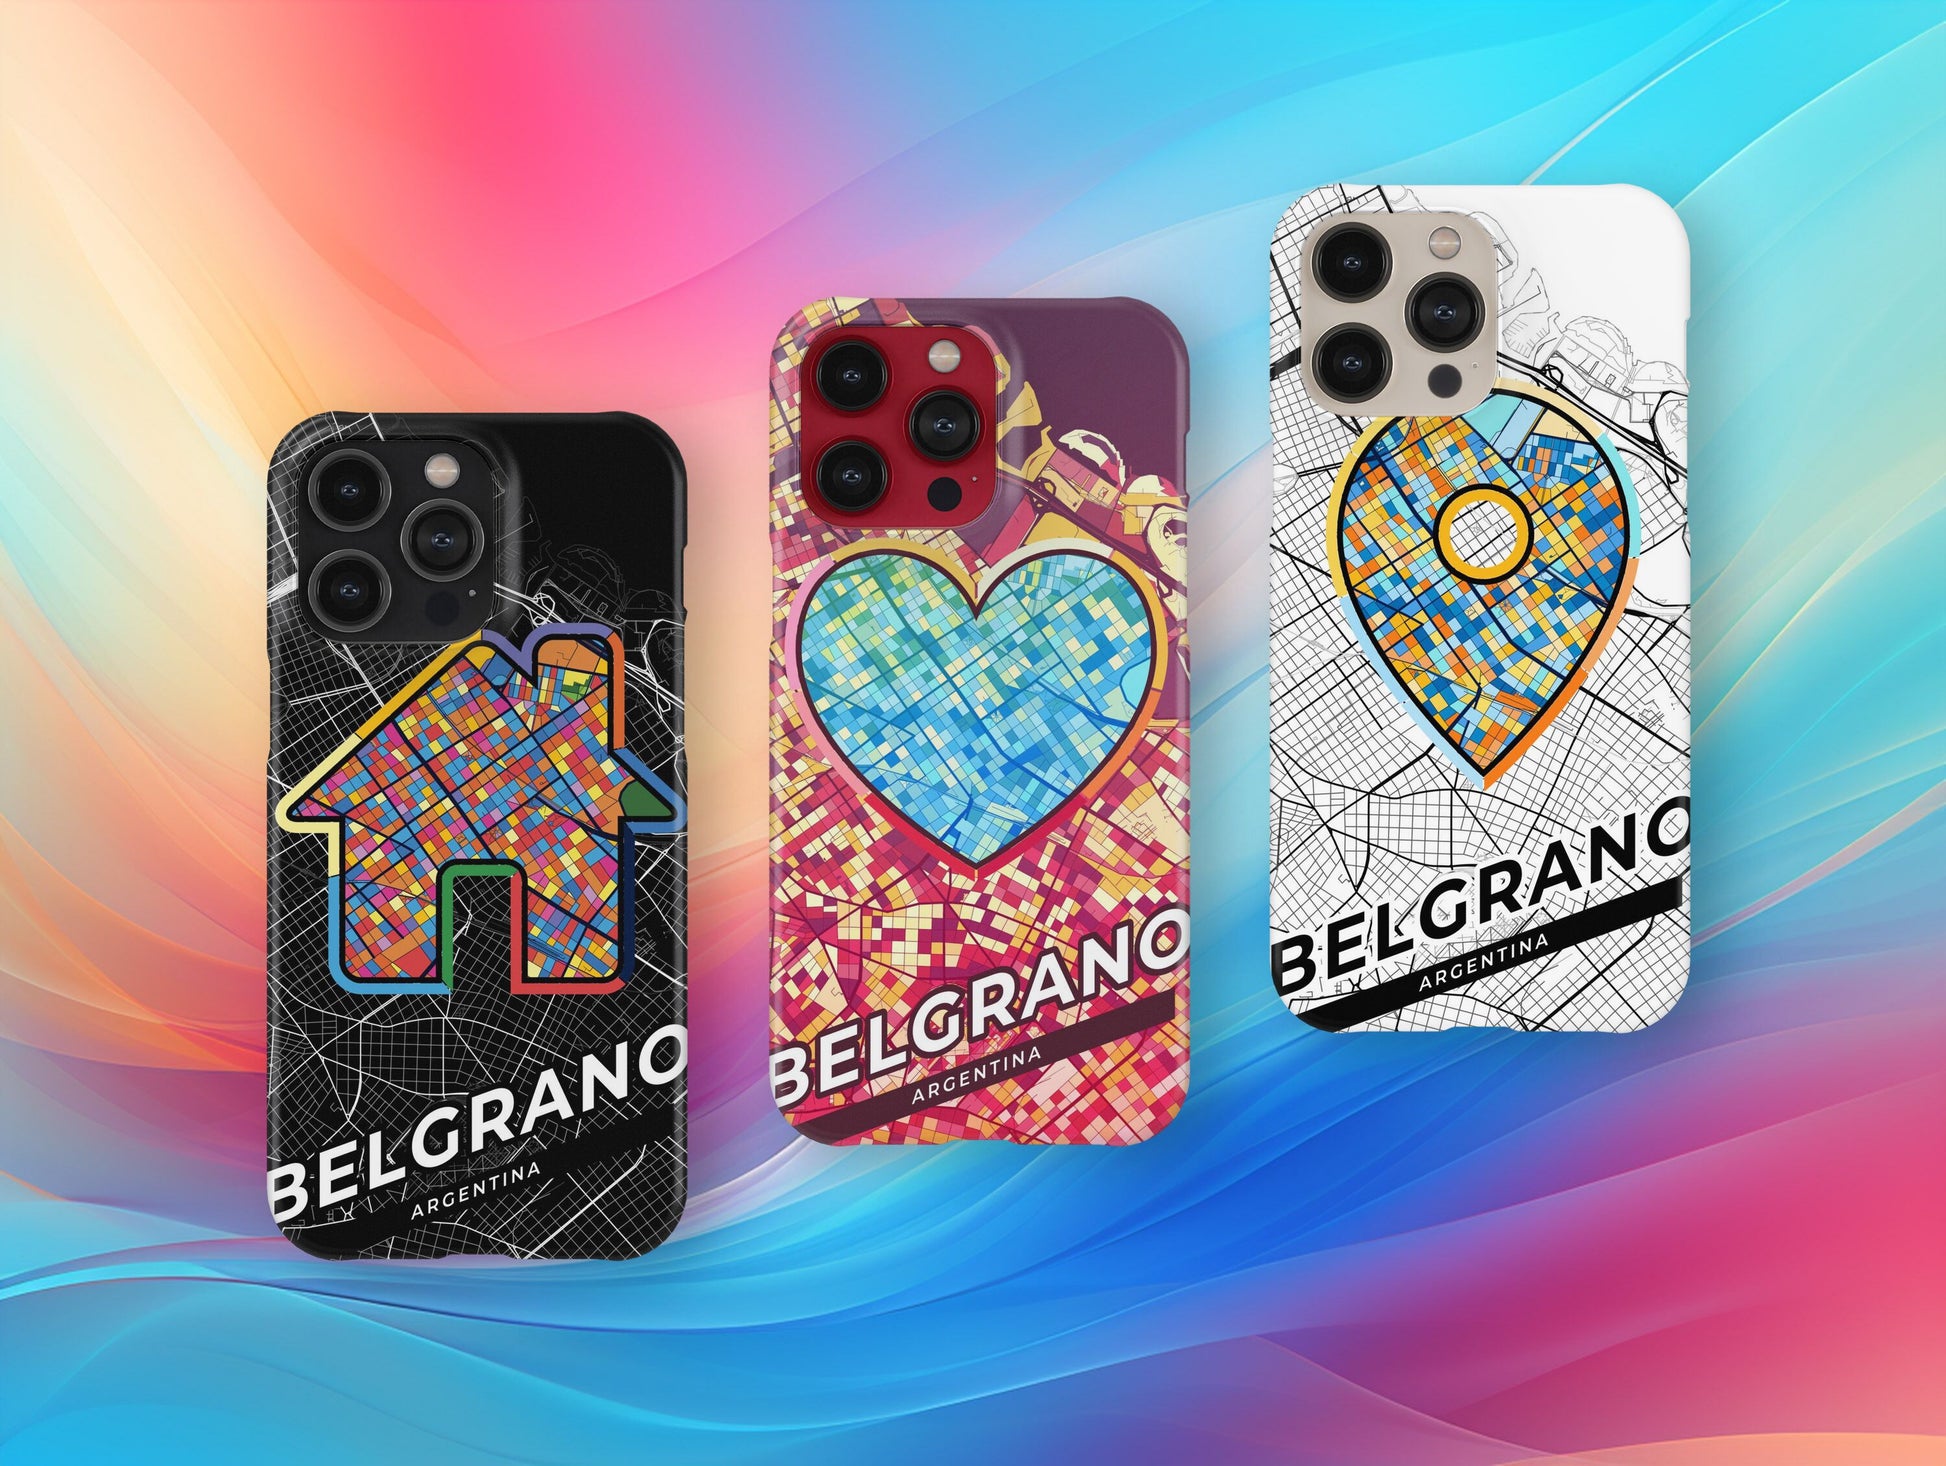 Belgrano Argentina slim phone case with colorful icon. Birthday, wedding or housewarming gift. Couple match cases.